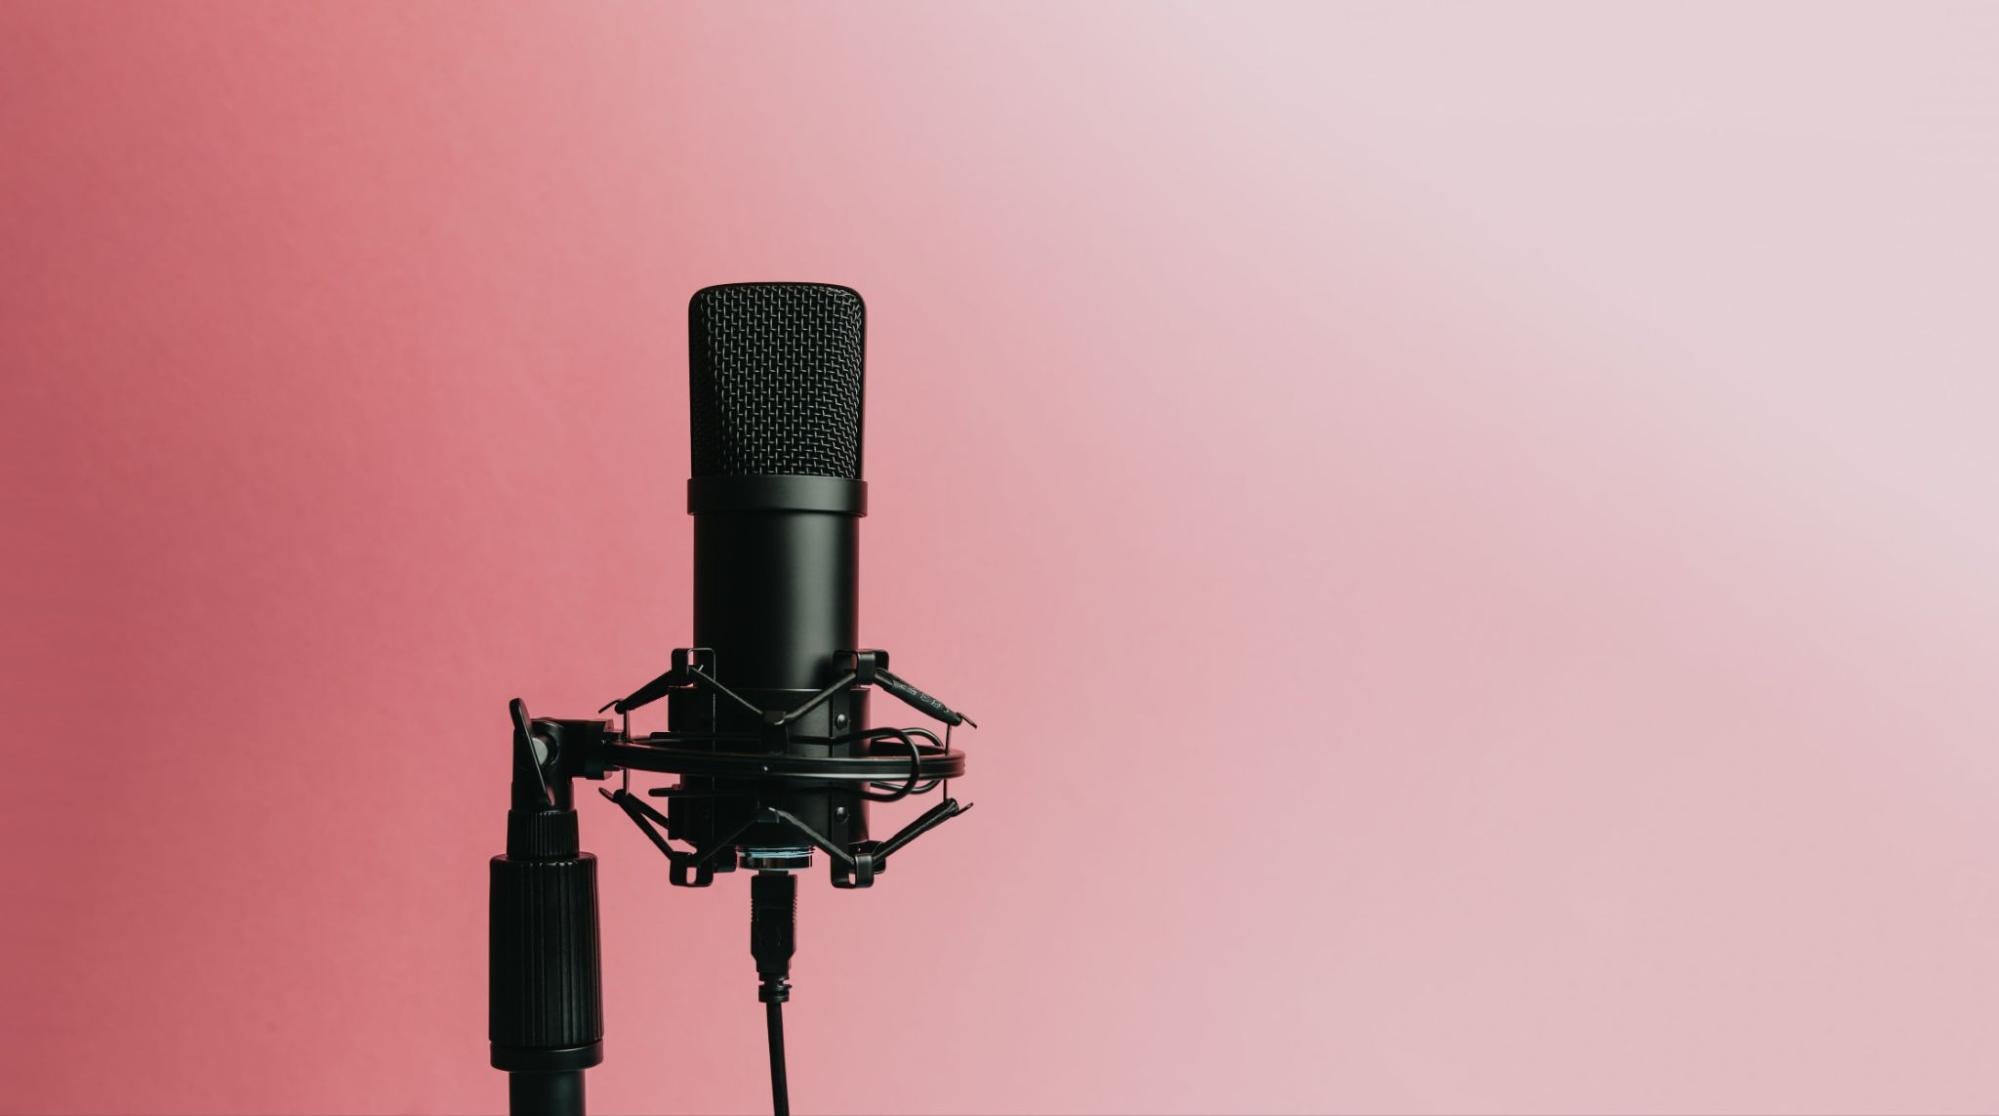 A black microphone is connected to a black stand against a pink background.